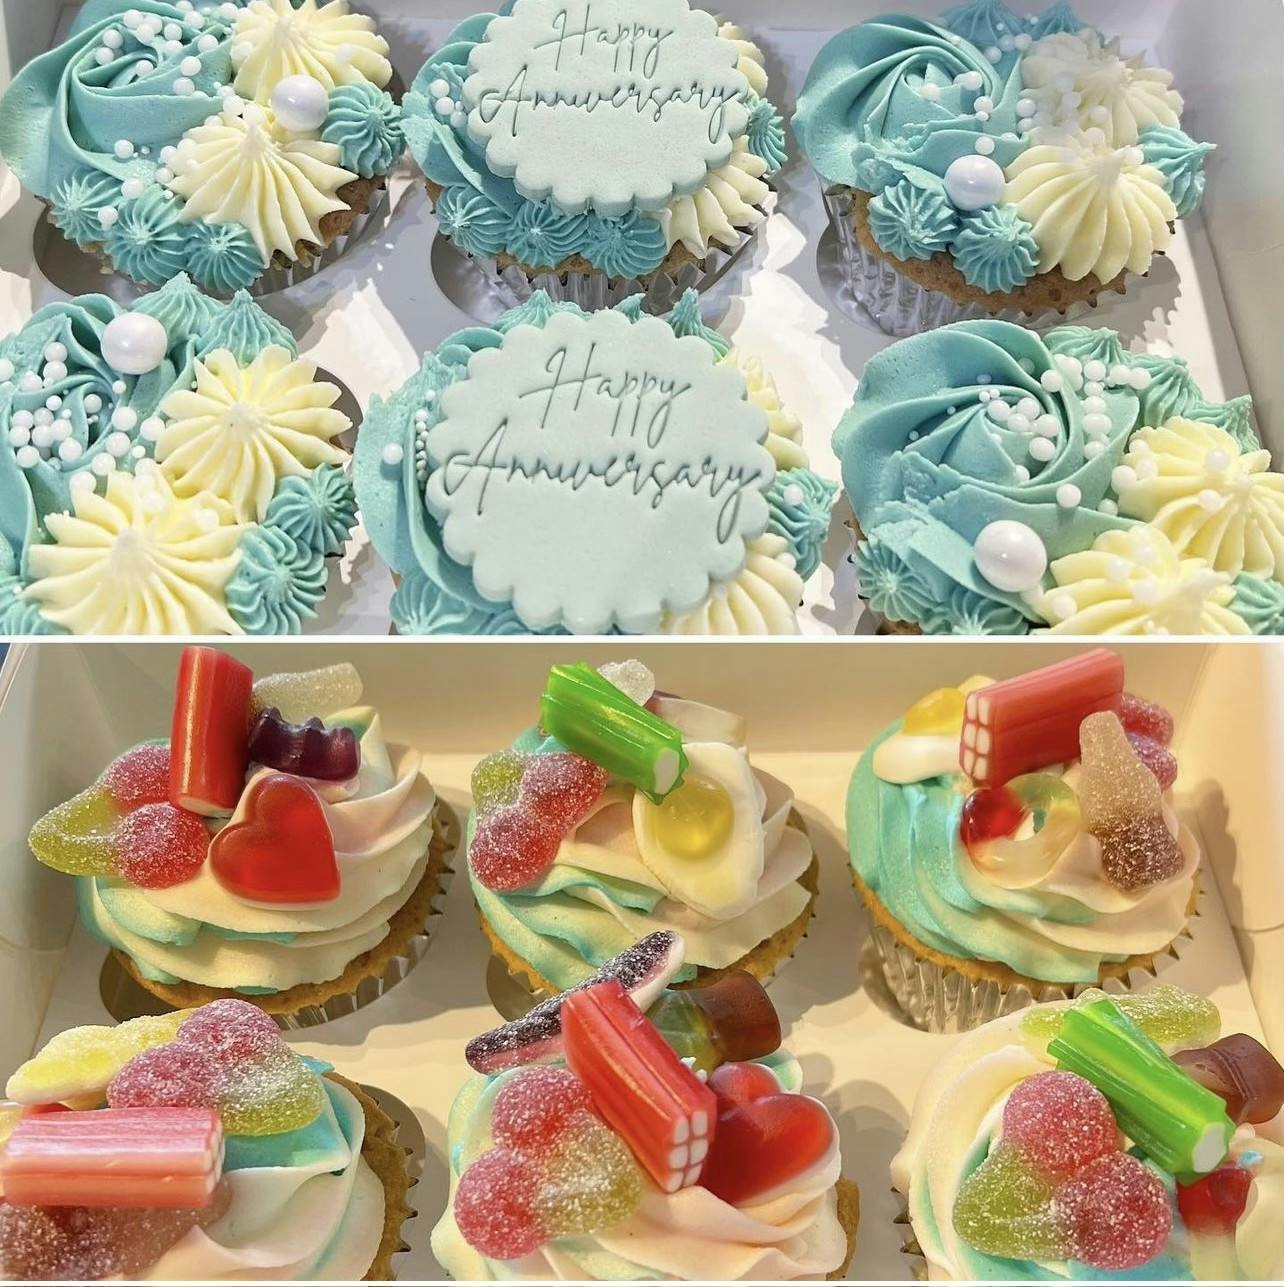 Cupcakes; some with fizzy sweets on top, some with blue and cream frosting on top